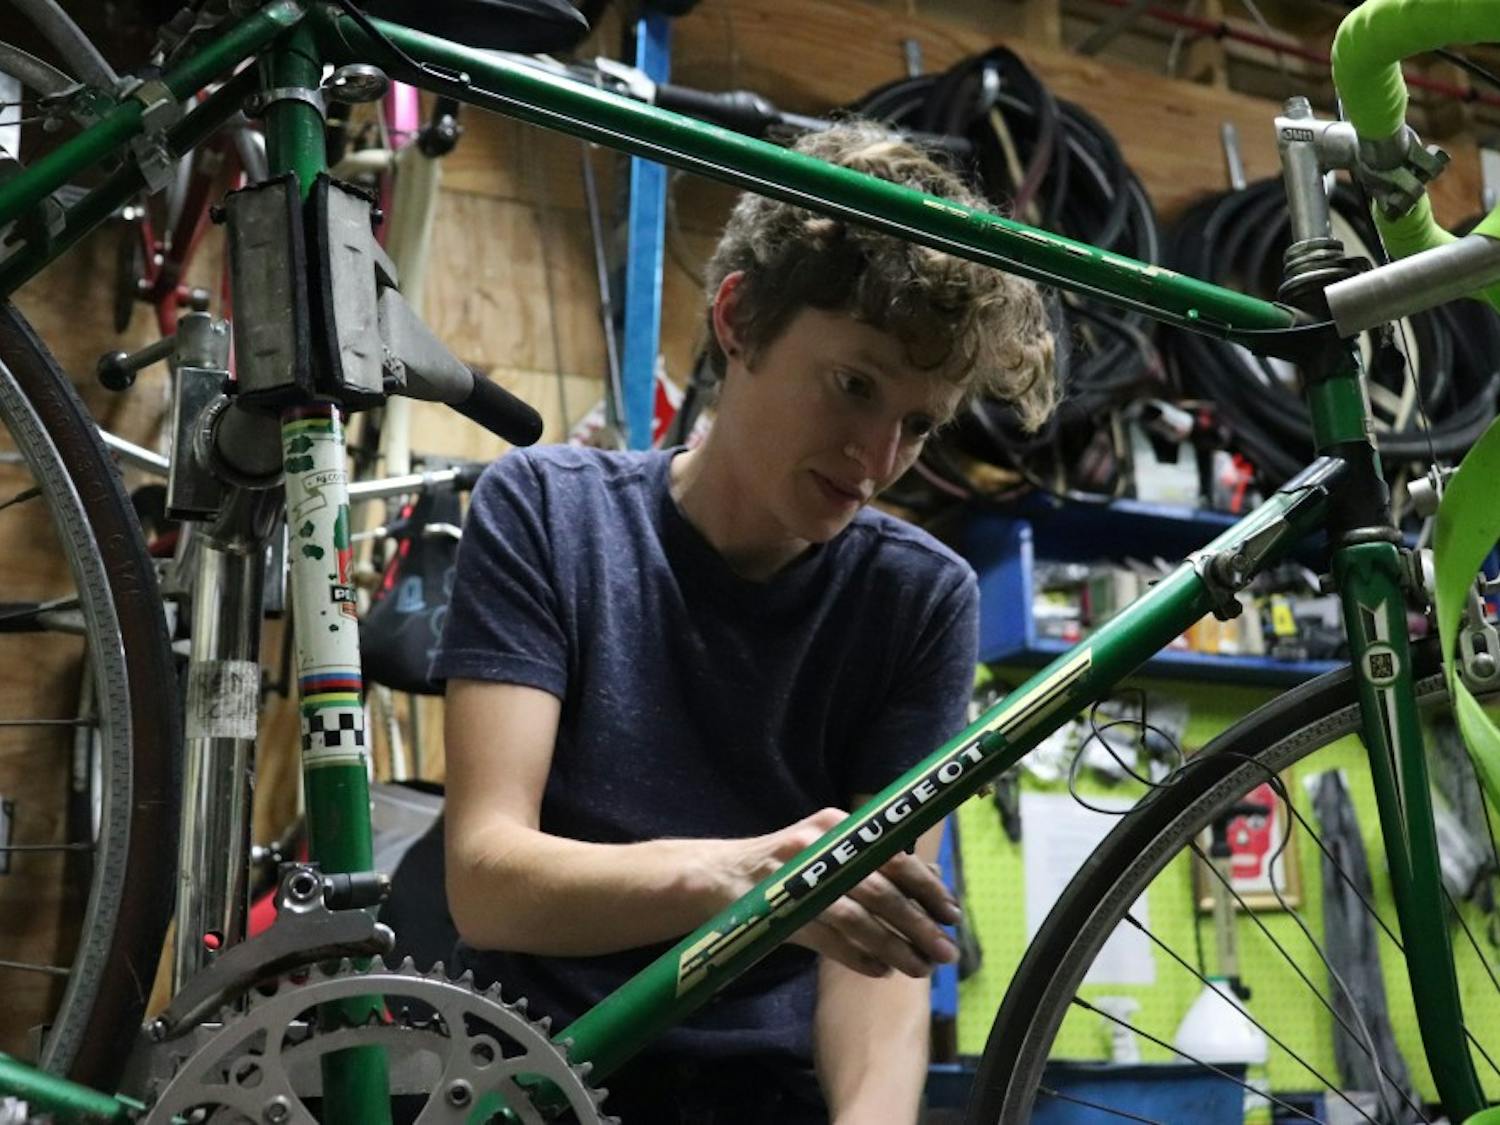 Christina Graves repairs a bike on Bike Wrenching Night at ReCYCLEry on Tuesday, Oct. 30. Bike Wrenching Night is an open shop held most Tuesdays aimed at women/trans/femme/non-binary individuals for bicycle repair and to improve mechanic skills.